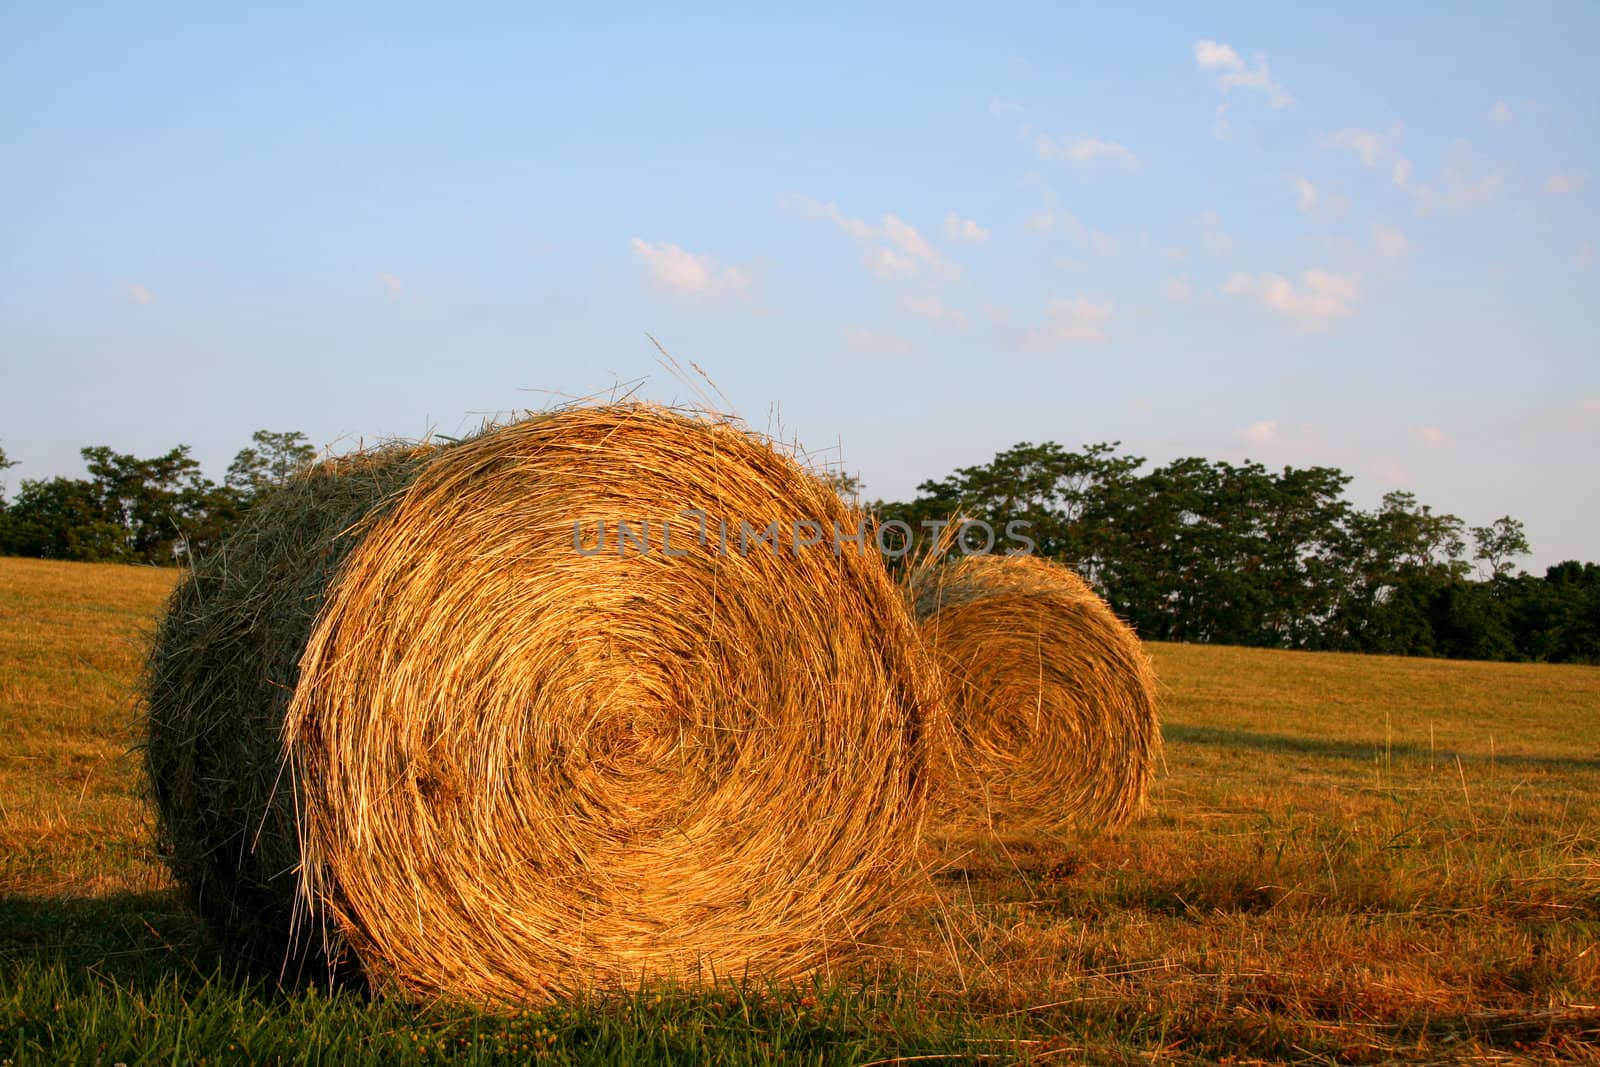 Hay bales on a late summers evening out in the country.